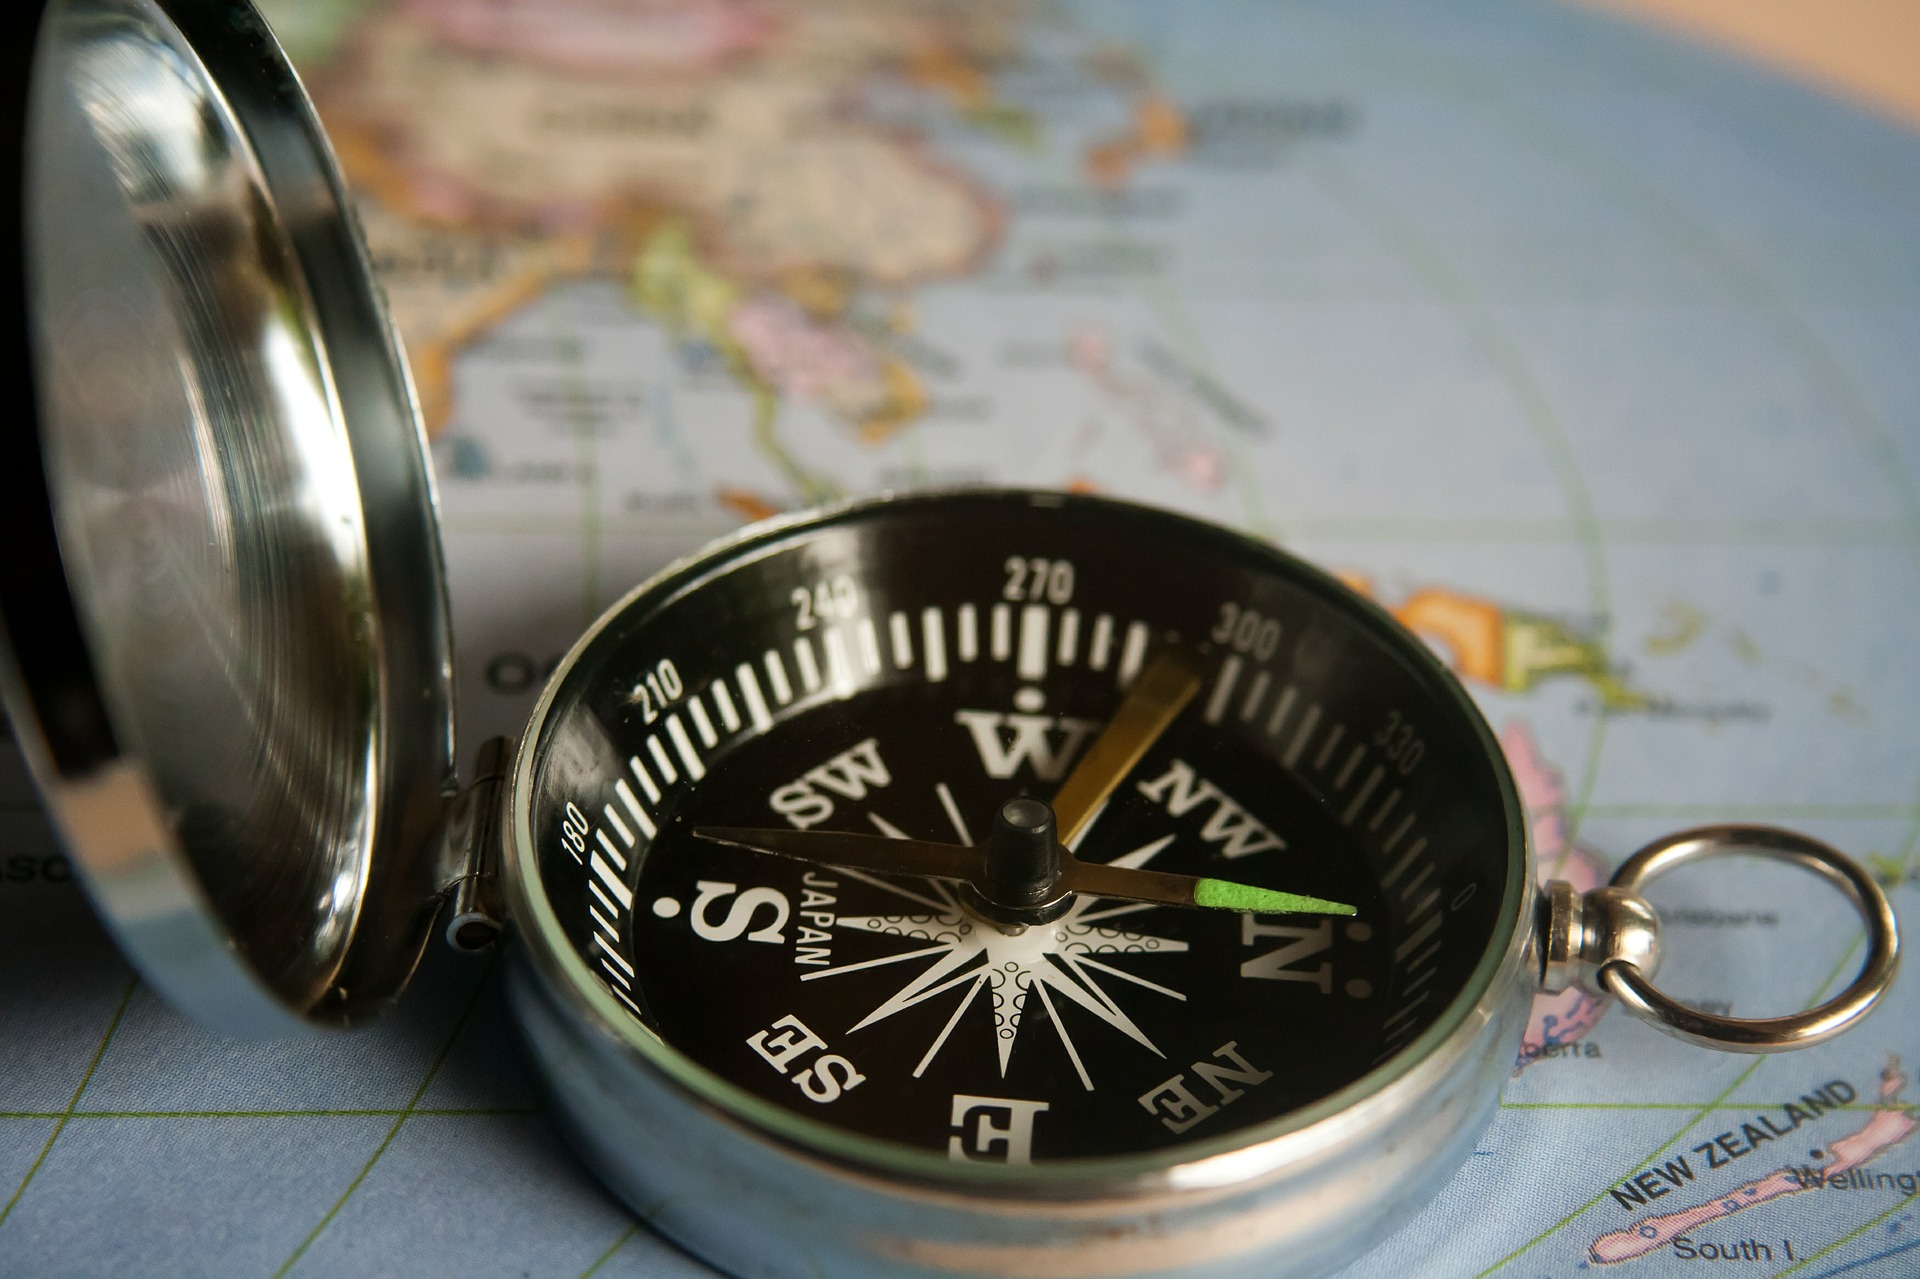 Compass: The Invention that Revolutionised Navigation